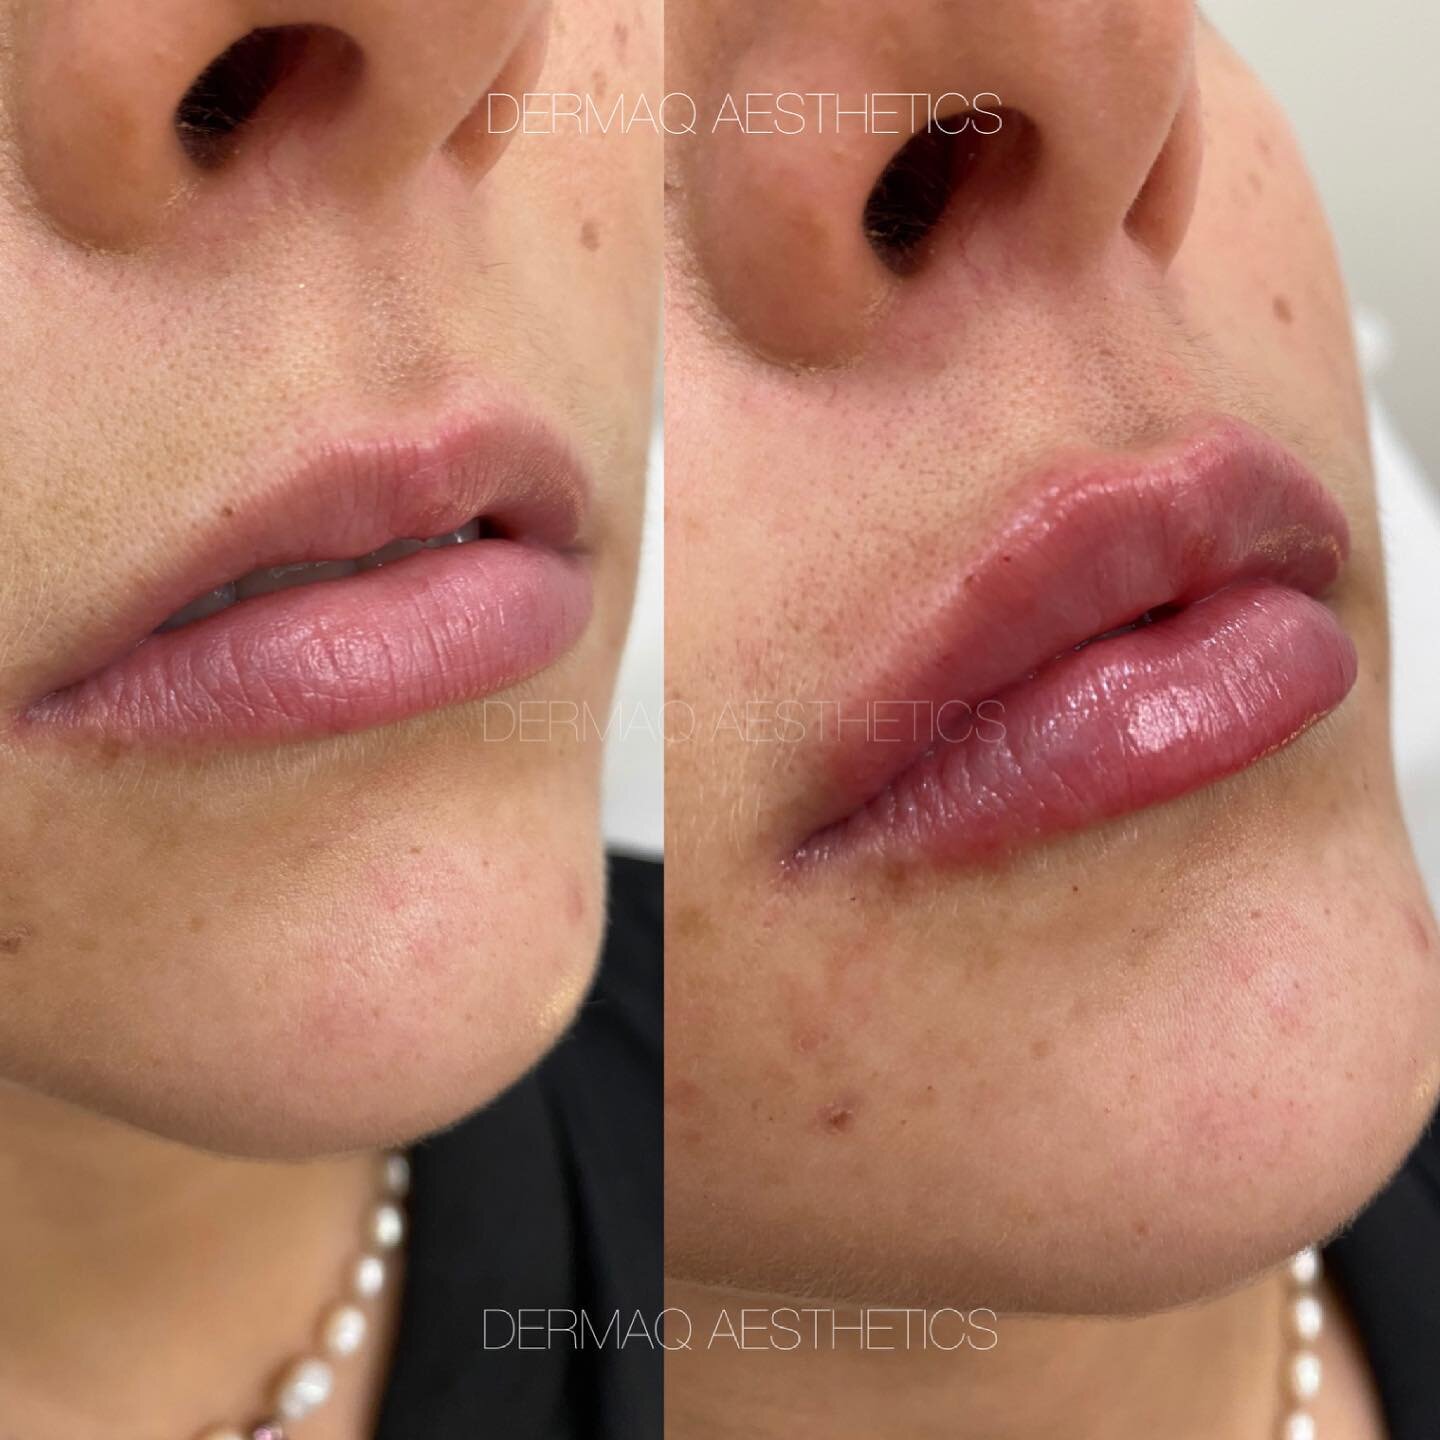 A little upper lip enhancement for your Thursday morning 🤍 the &lsquo;m&rsquo; shaped upper lip can be difficult to balance and &lsquo;fill in&rsquo;, but this transformation is absolutely stunning!
-
-
-
-
#dermalfiller #lipfiller #lipflip #cosmeti